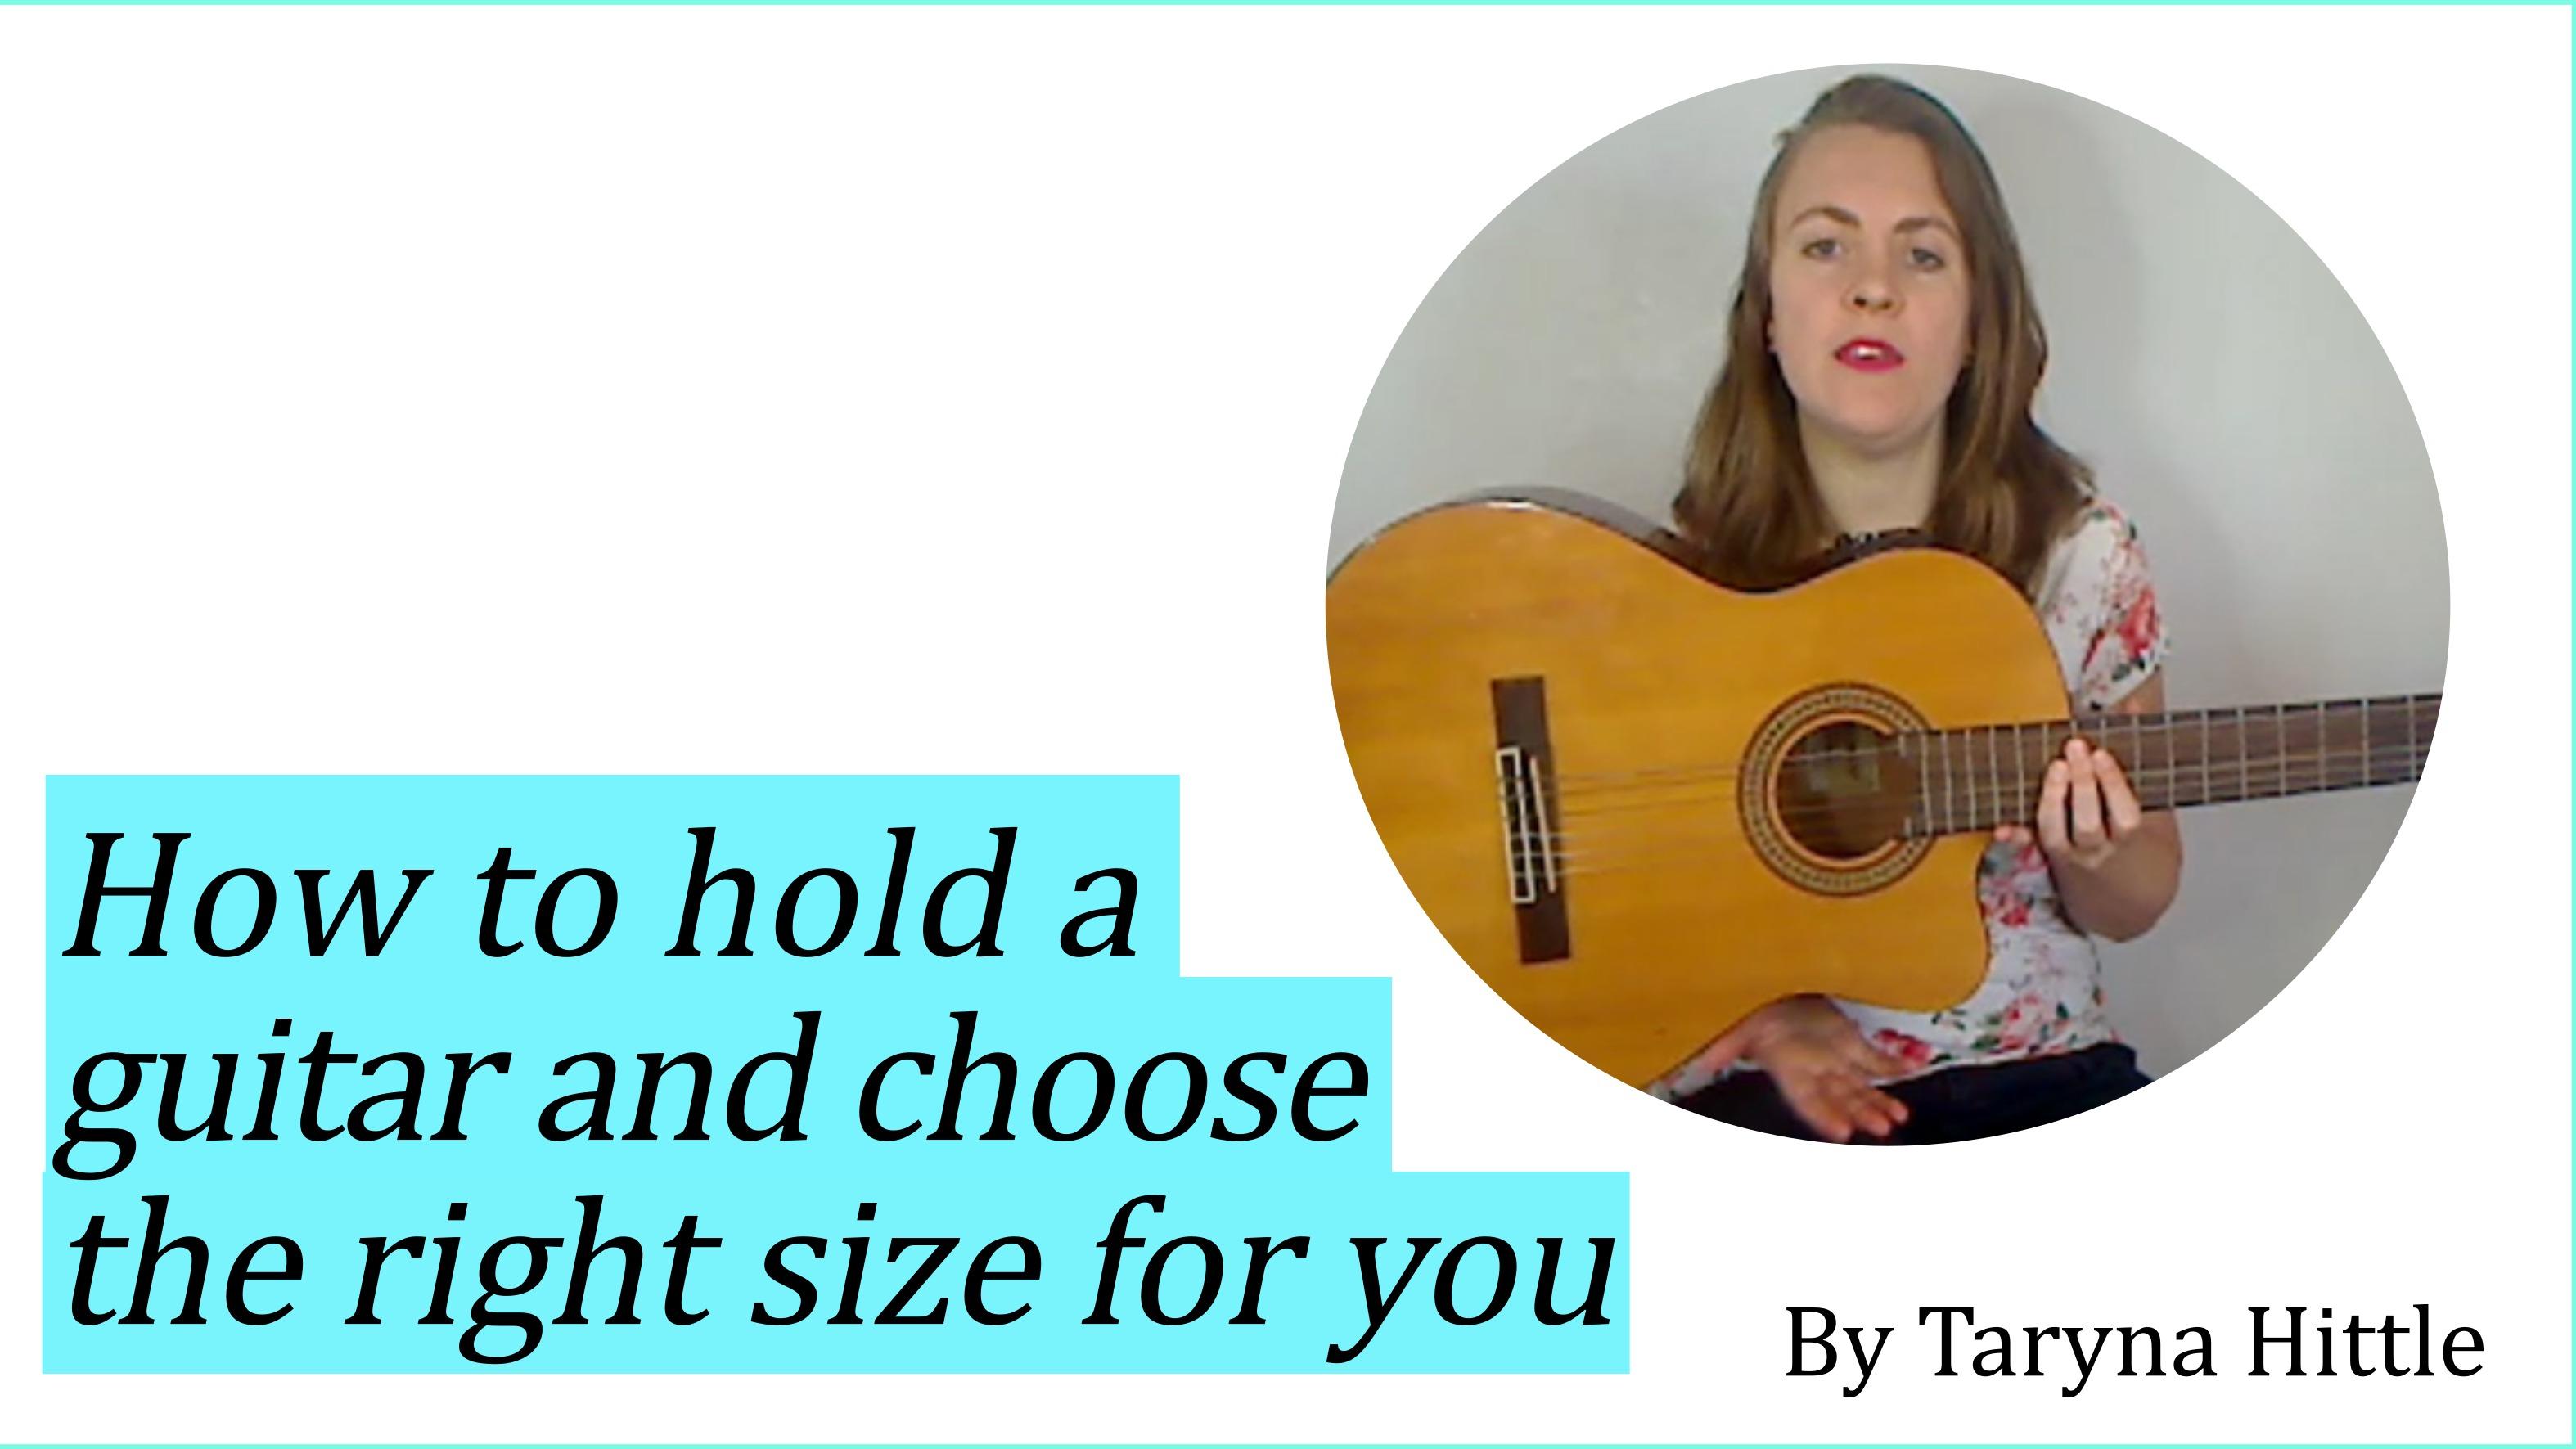 How to hold a guitar when sitting and choosing the right size